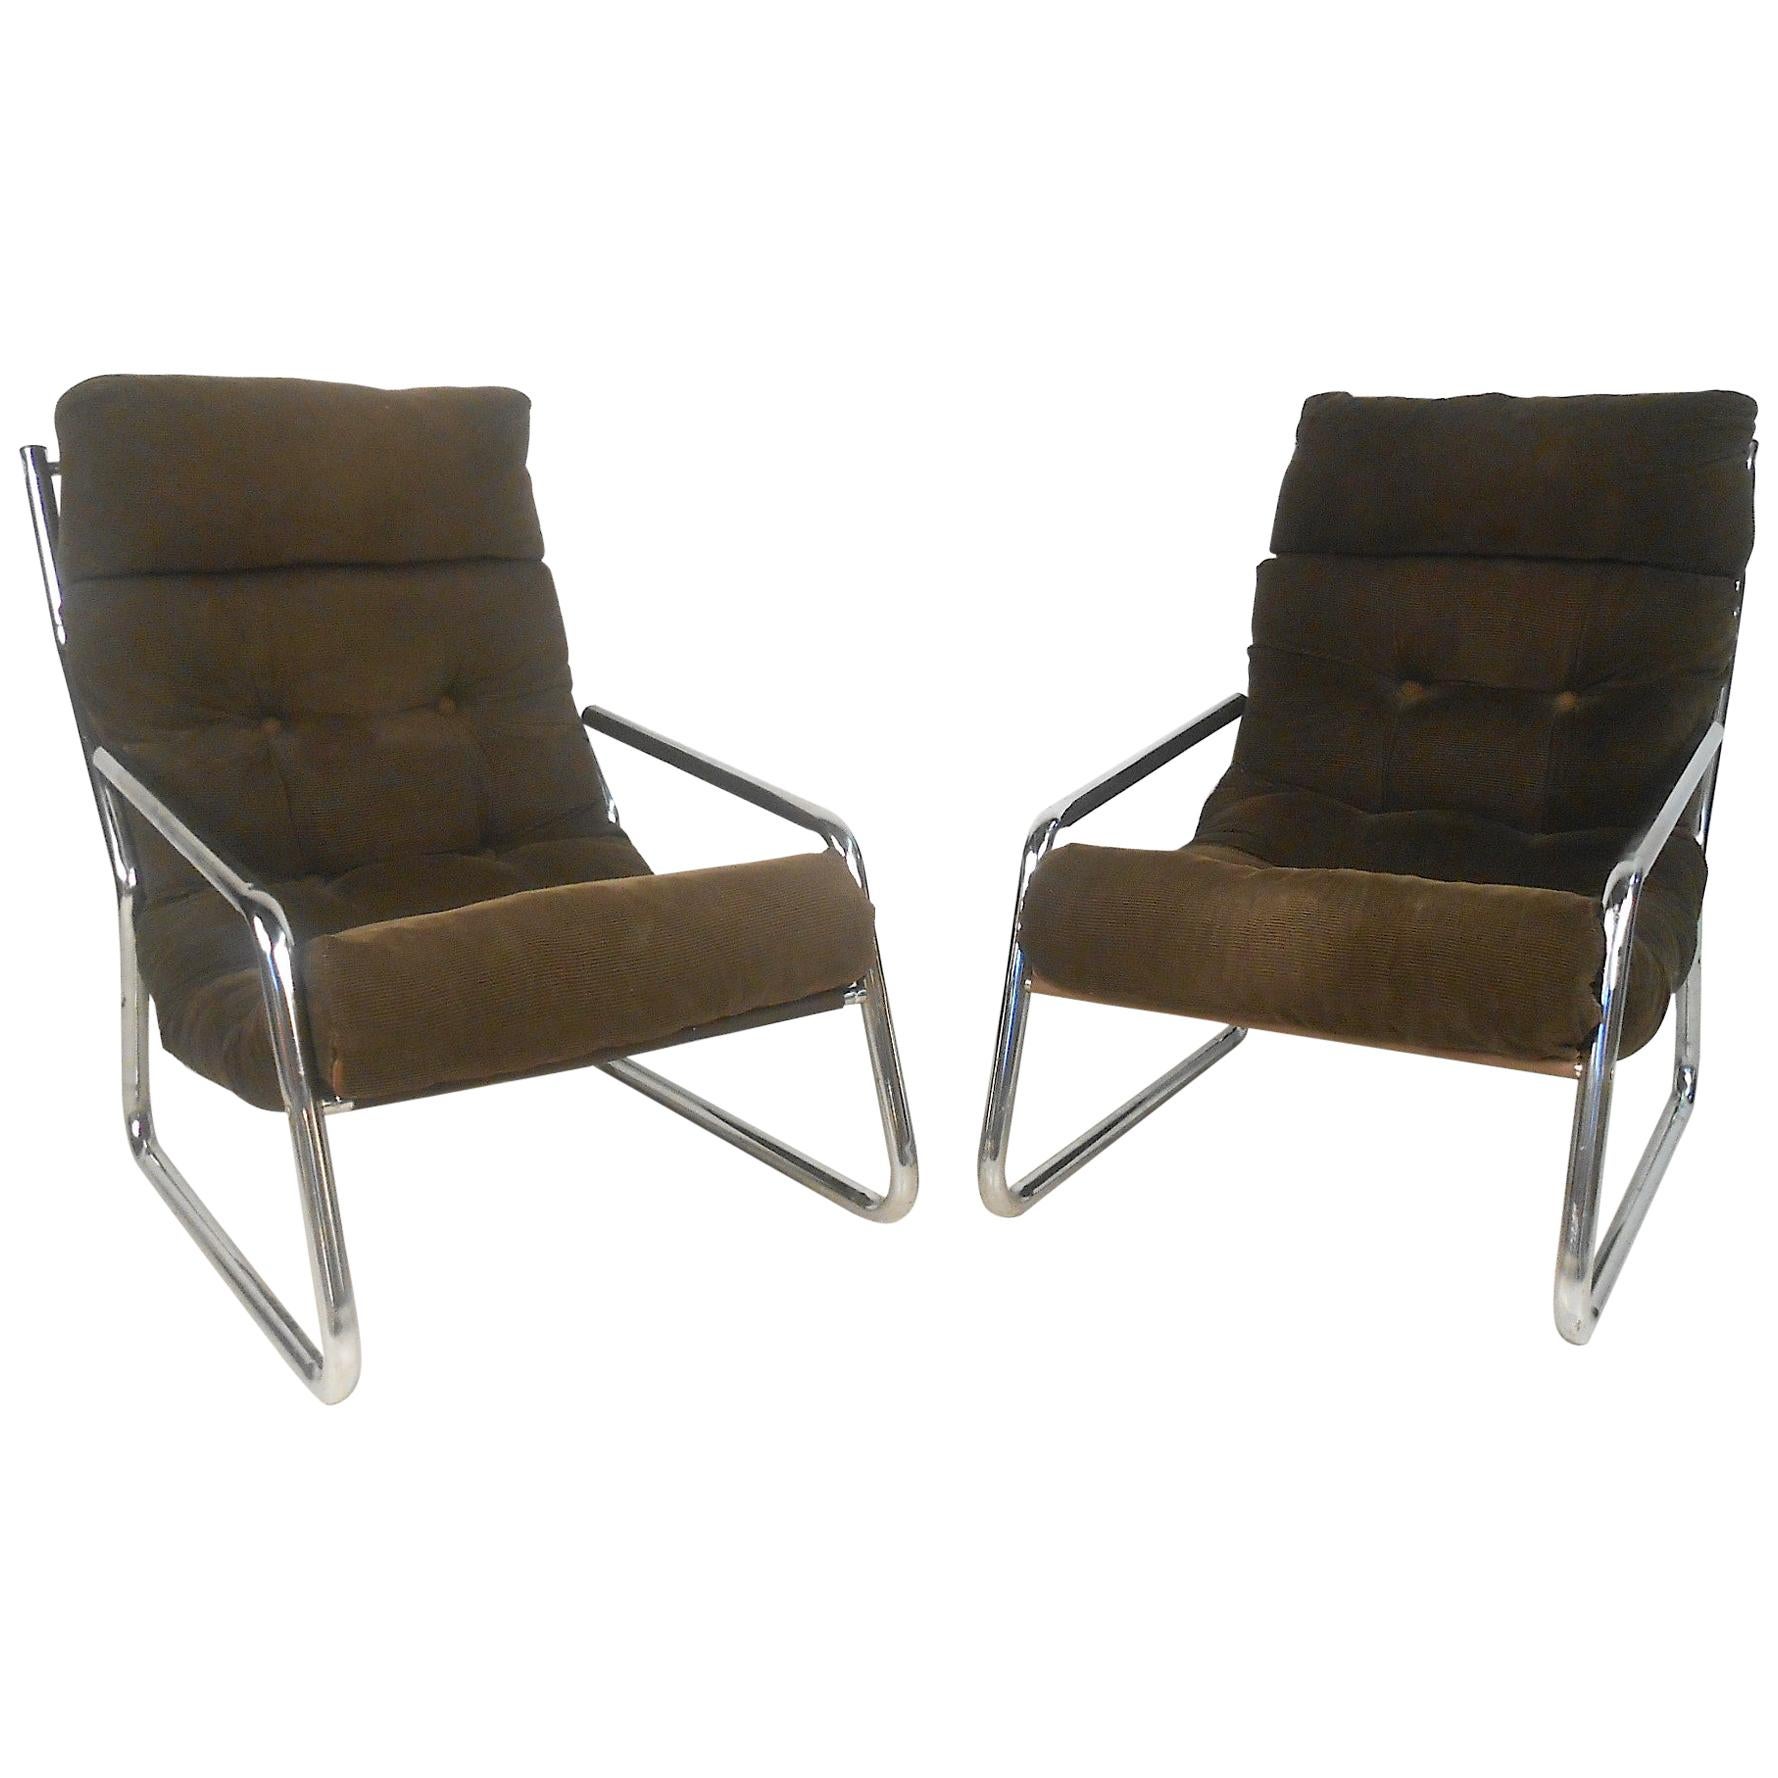 Pair of Midcentury Upholstered Lounge Chairs